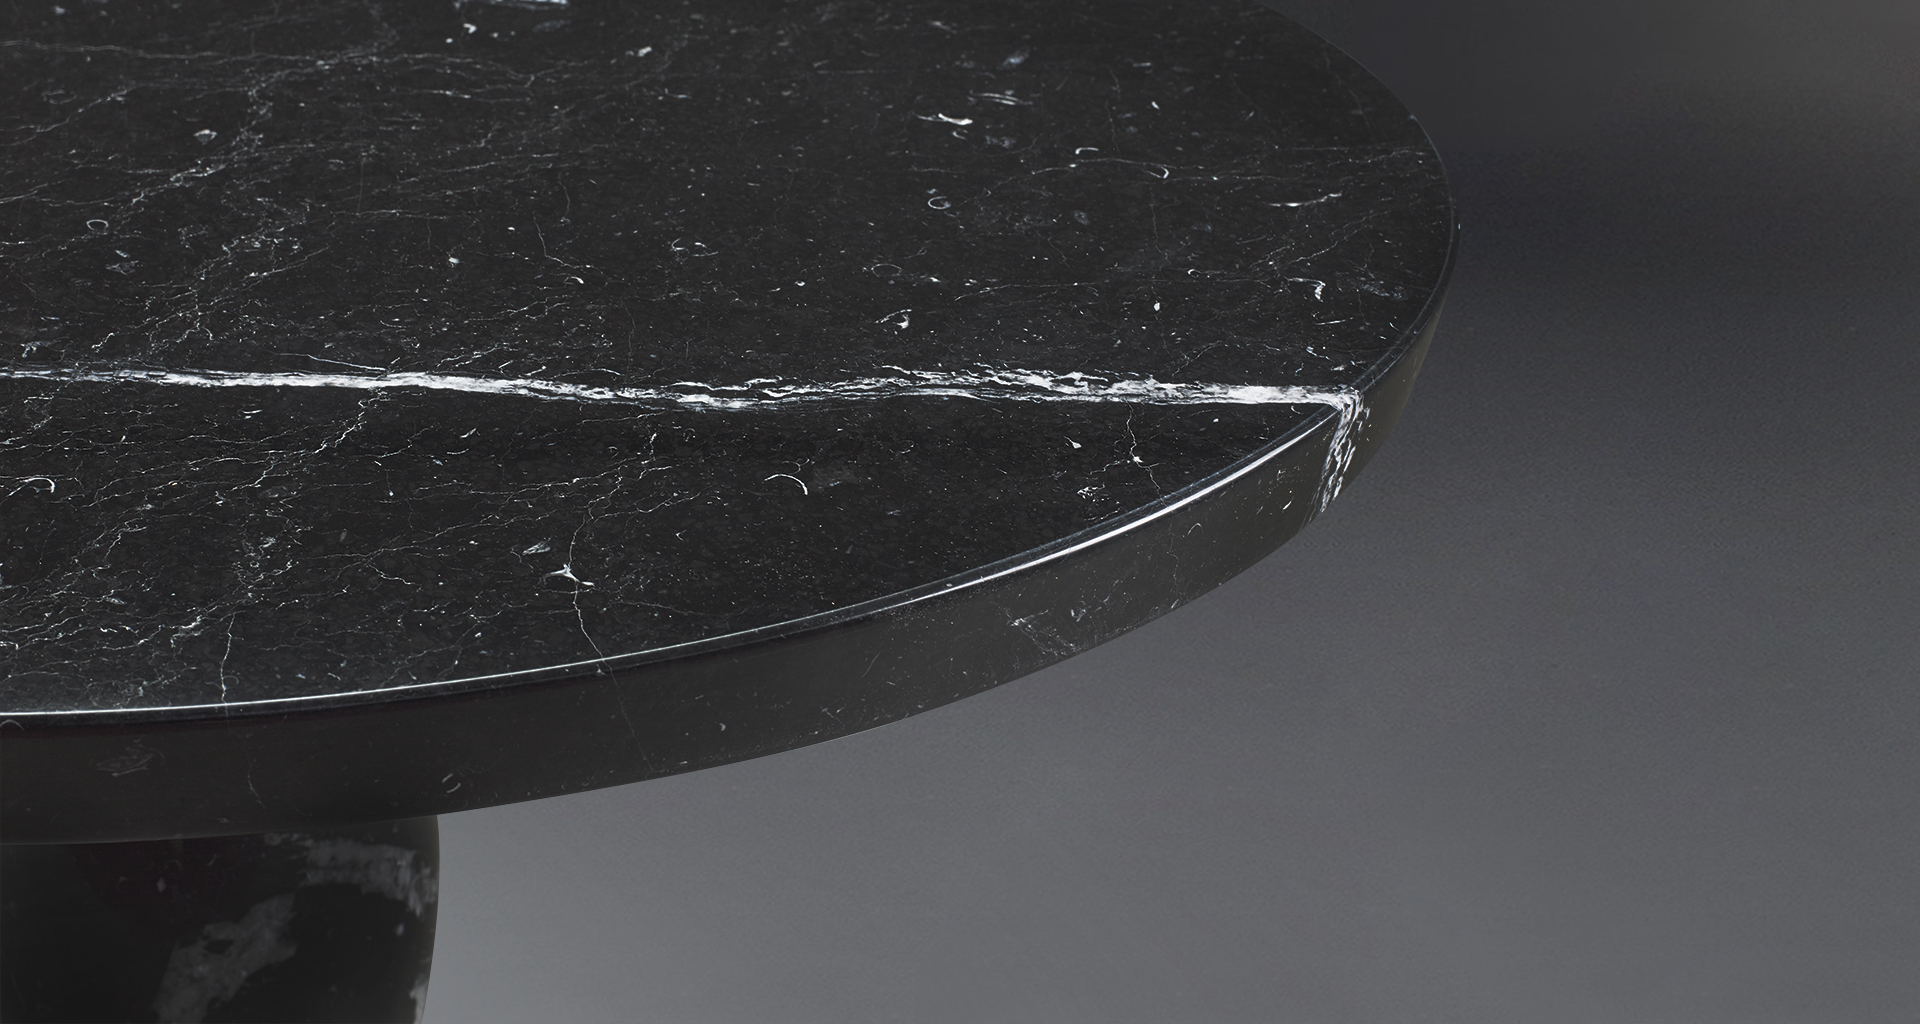 Mediterranée is a small table available in marble, from Promemoria's Capsule Collection by Olivier Gagnère | Promemoria